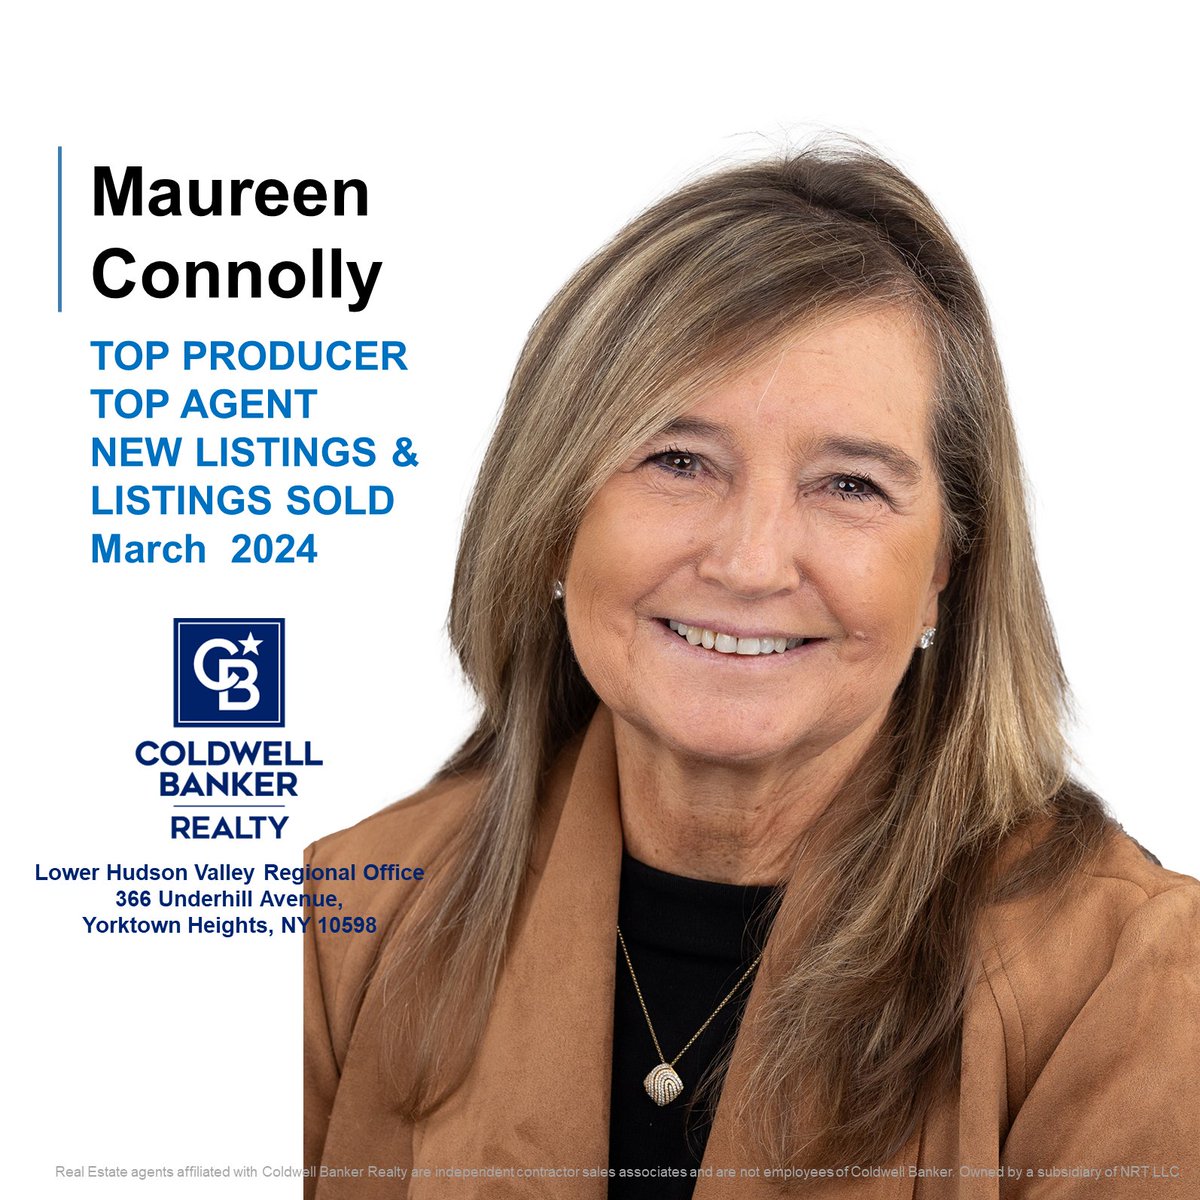 Congratulations to Maureen Connolly on being March’s TopProducer, Top Agent – New Listings and Listings Sold.
Your dedication and hard work is greatly appreciated, Maureen!
#congratulations #cbr #ctwc #realestate #lhvro #cbproud #cbtheplacetobe #bestagent #agentofcoldwellbanker